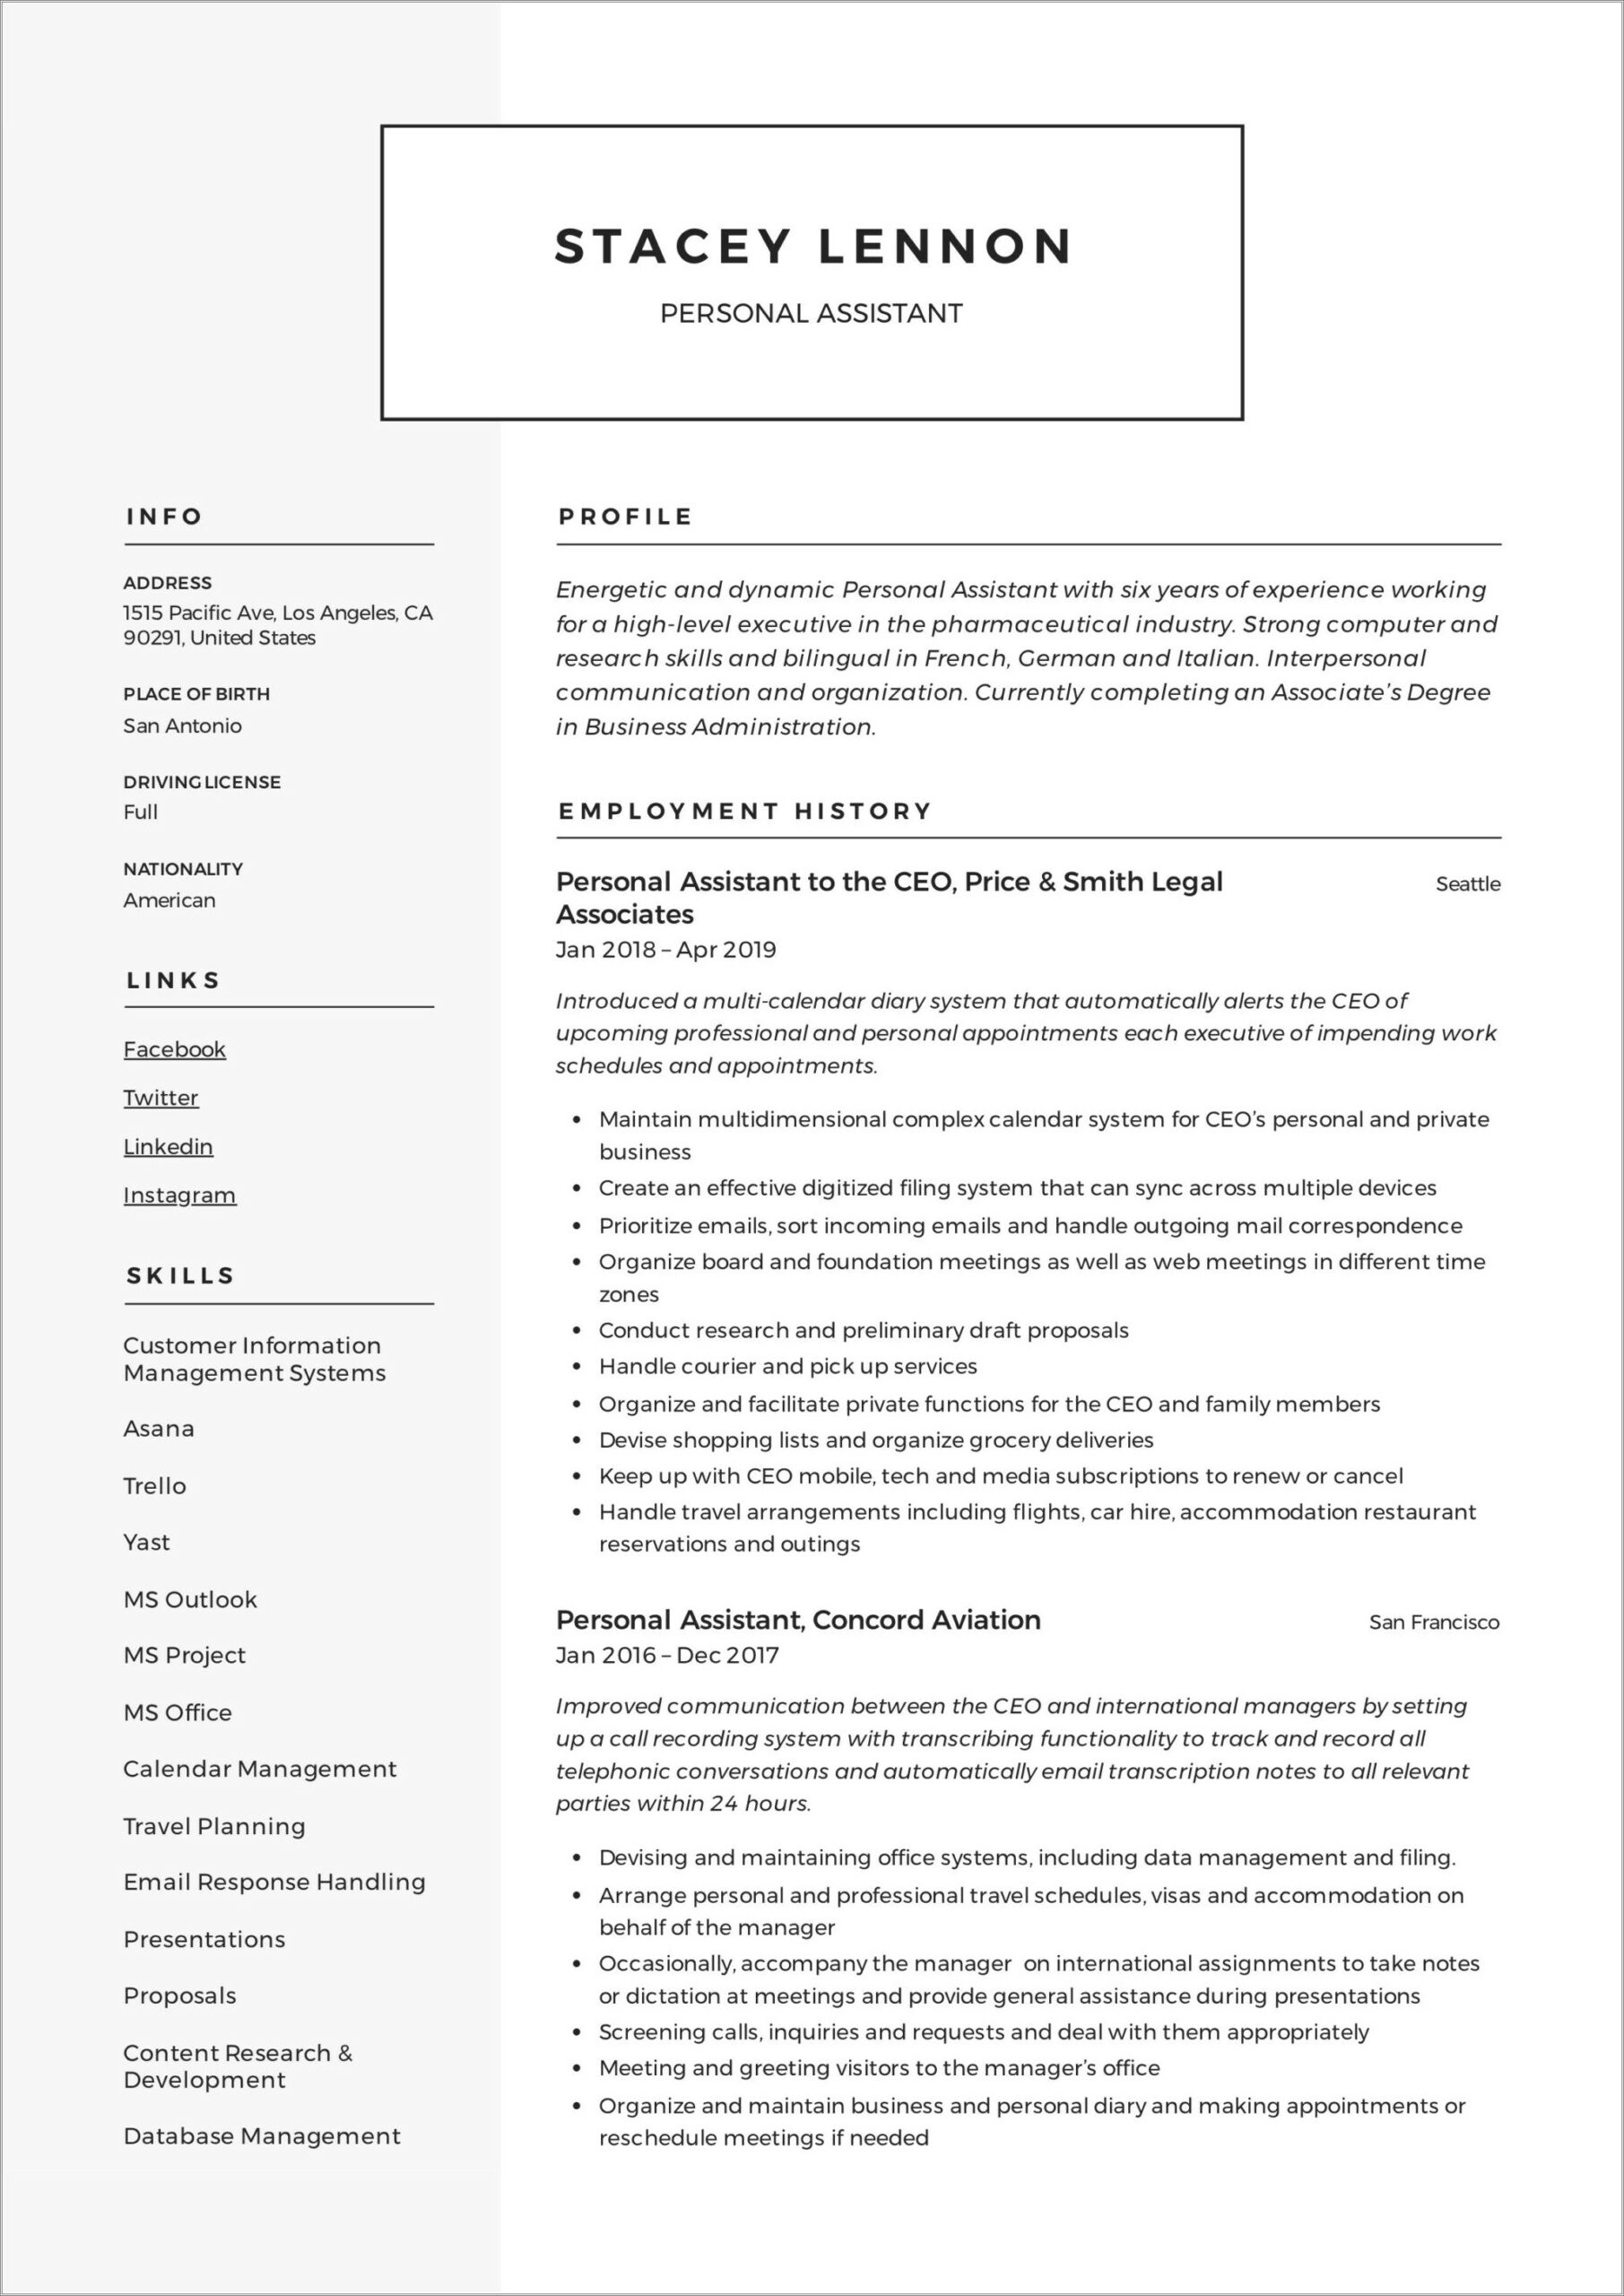 Resume Summary Examples For Personal Assistant